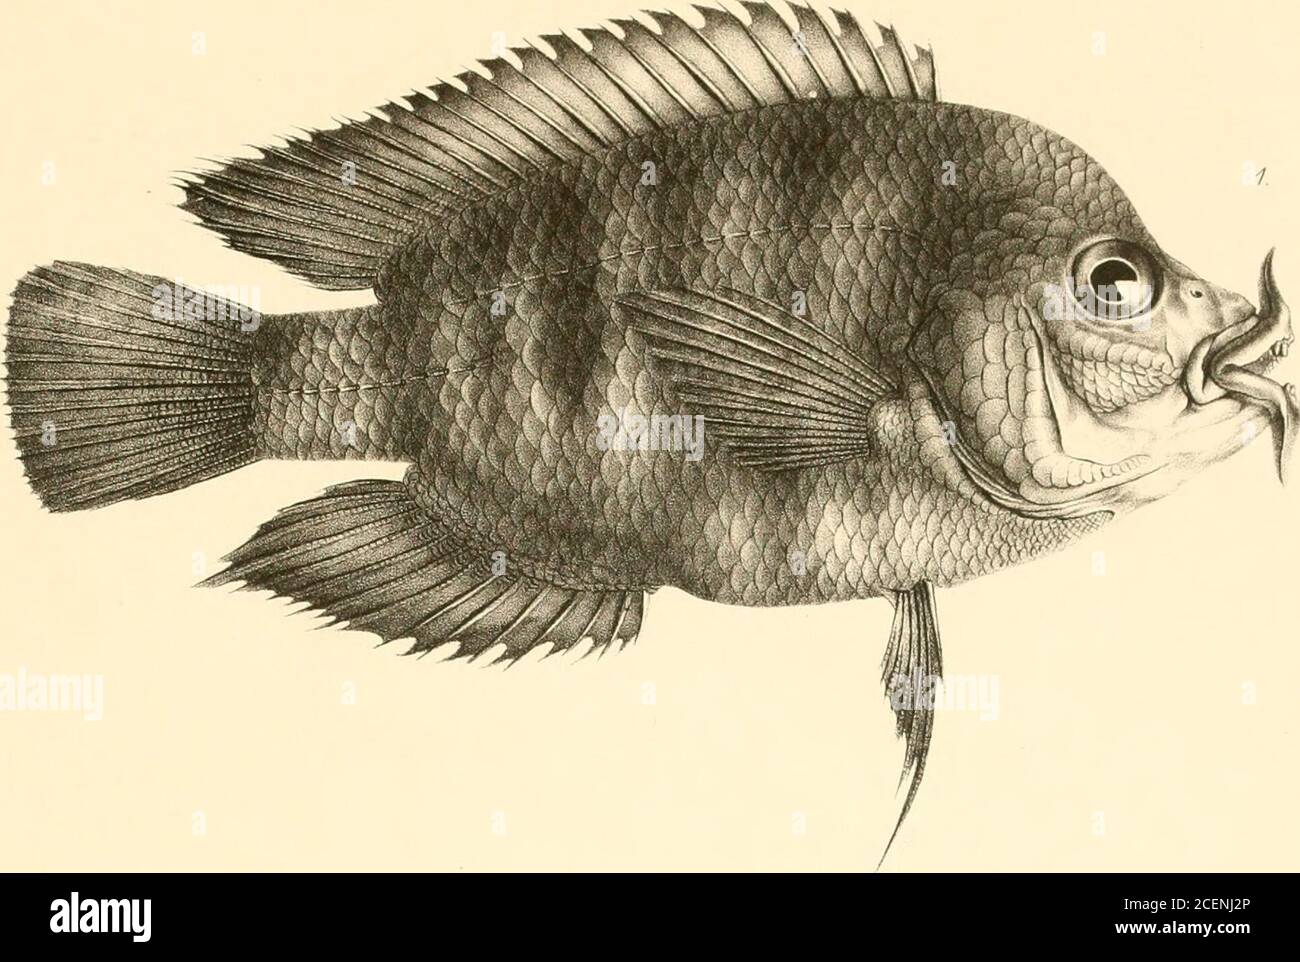 . An account of the fishes of the states of Central America : based on collections made by Capt. J. M. Dow, F. Godman and O. Salvin. 1. PLATYGLOSSUS DISPILUS.2.HER0S MULTISPmOSUS. 3. R MCtROFASCIATUS. 4- InTEETROPLUS MEMATOPUS. S. IfF.ROS GODMANMl fOu. u%m0M-. Stock Photo